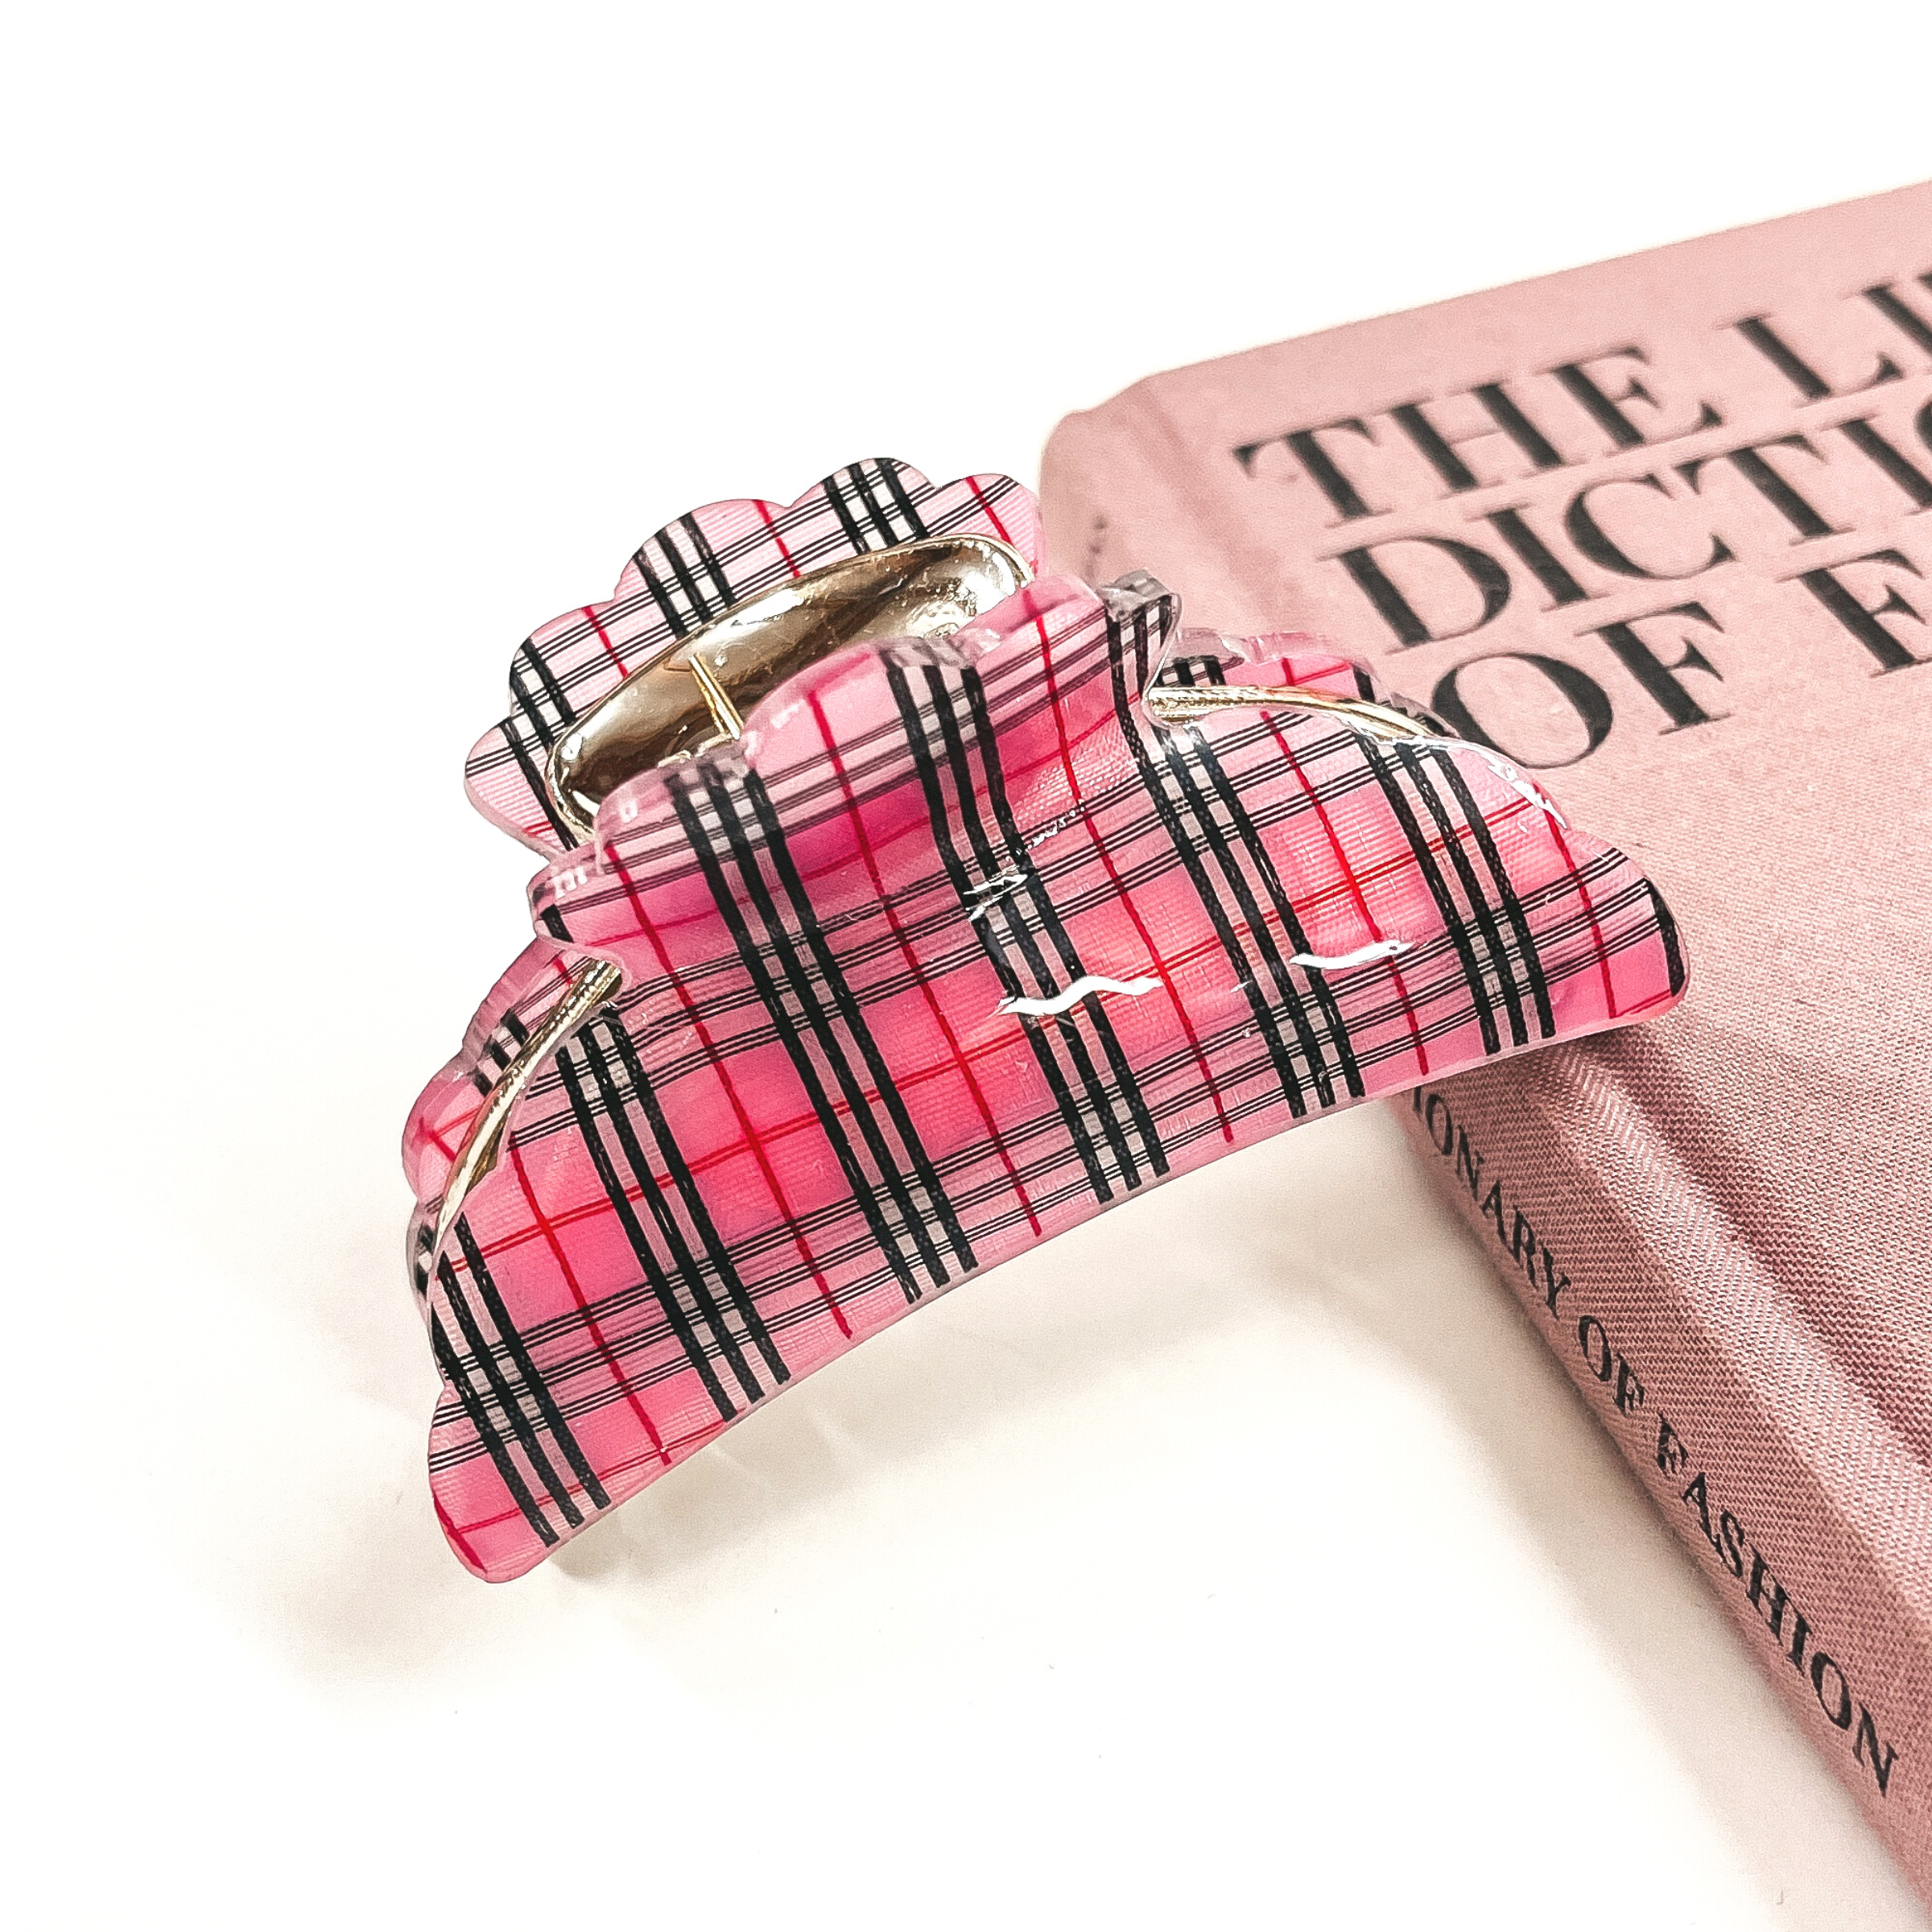 This is a gold and pink plaid print hair clip laying on the side of a pink book and white background.